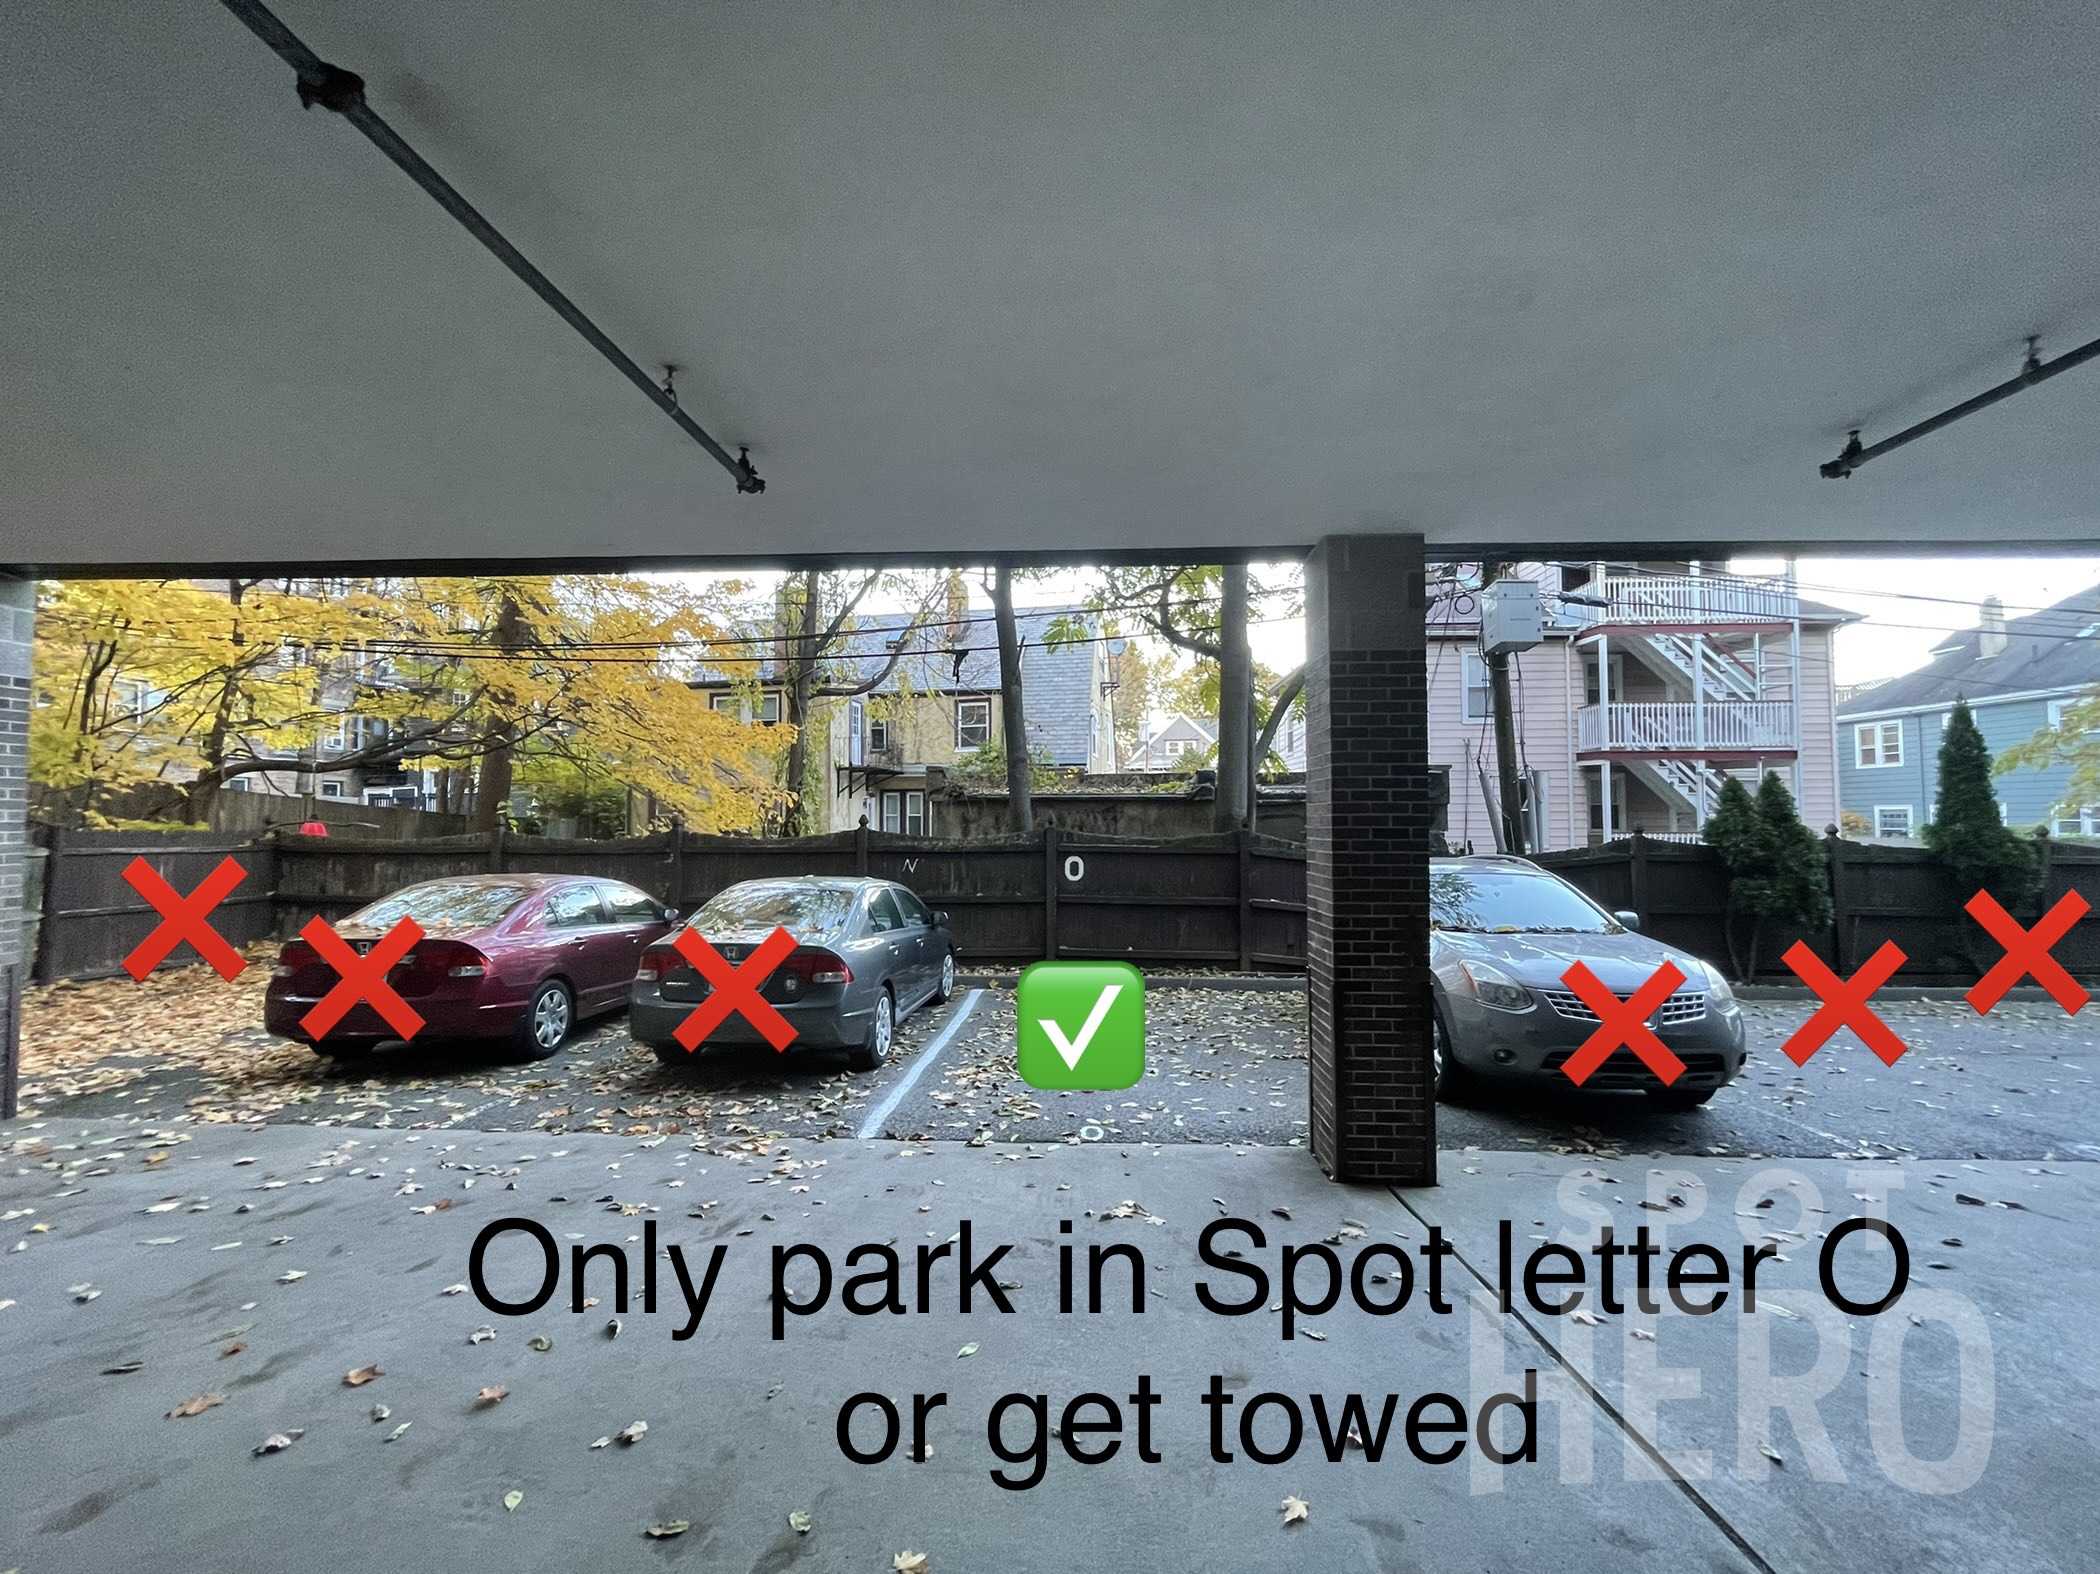 Boston College Parking  Book now on SpotHero and save